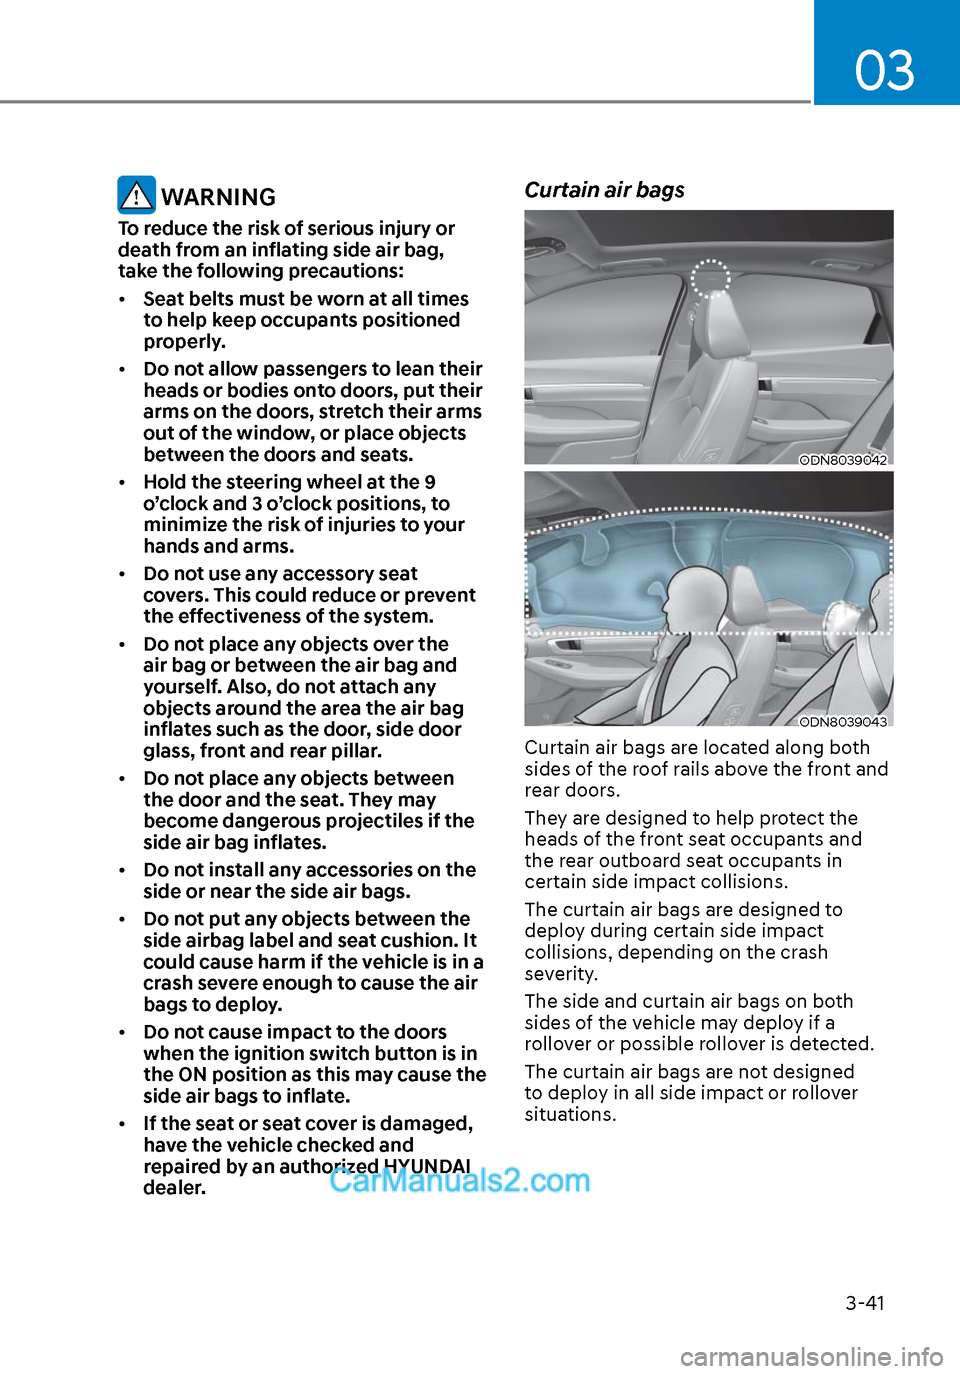 Hyundai Sonata 2020 Repair Manual 03
3-41
 WARNING
To reduce the risk of serious injury or 
death from an inflating side air bag, 
take the following precautions:
• Seat belts must be worn at all times 
to help keep occupants positi